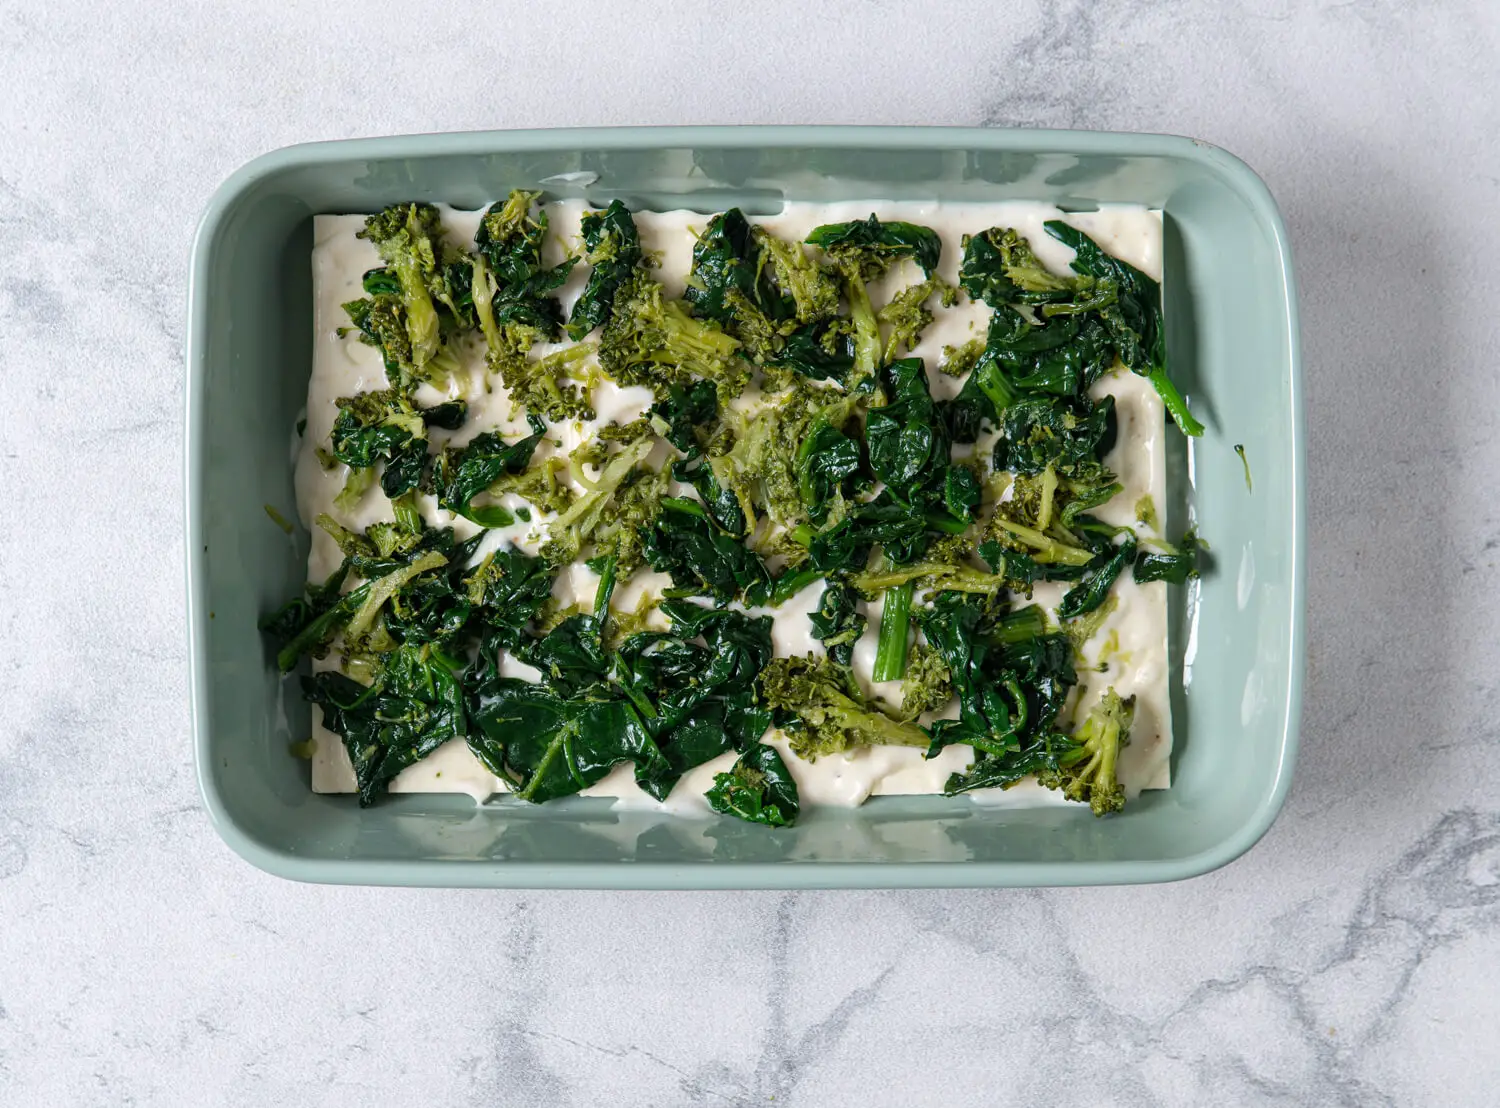 Bechamel sauce, spinach-broccoli mixture, ricotta, and mozzarella go on top of the noodles.